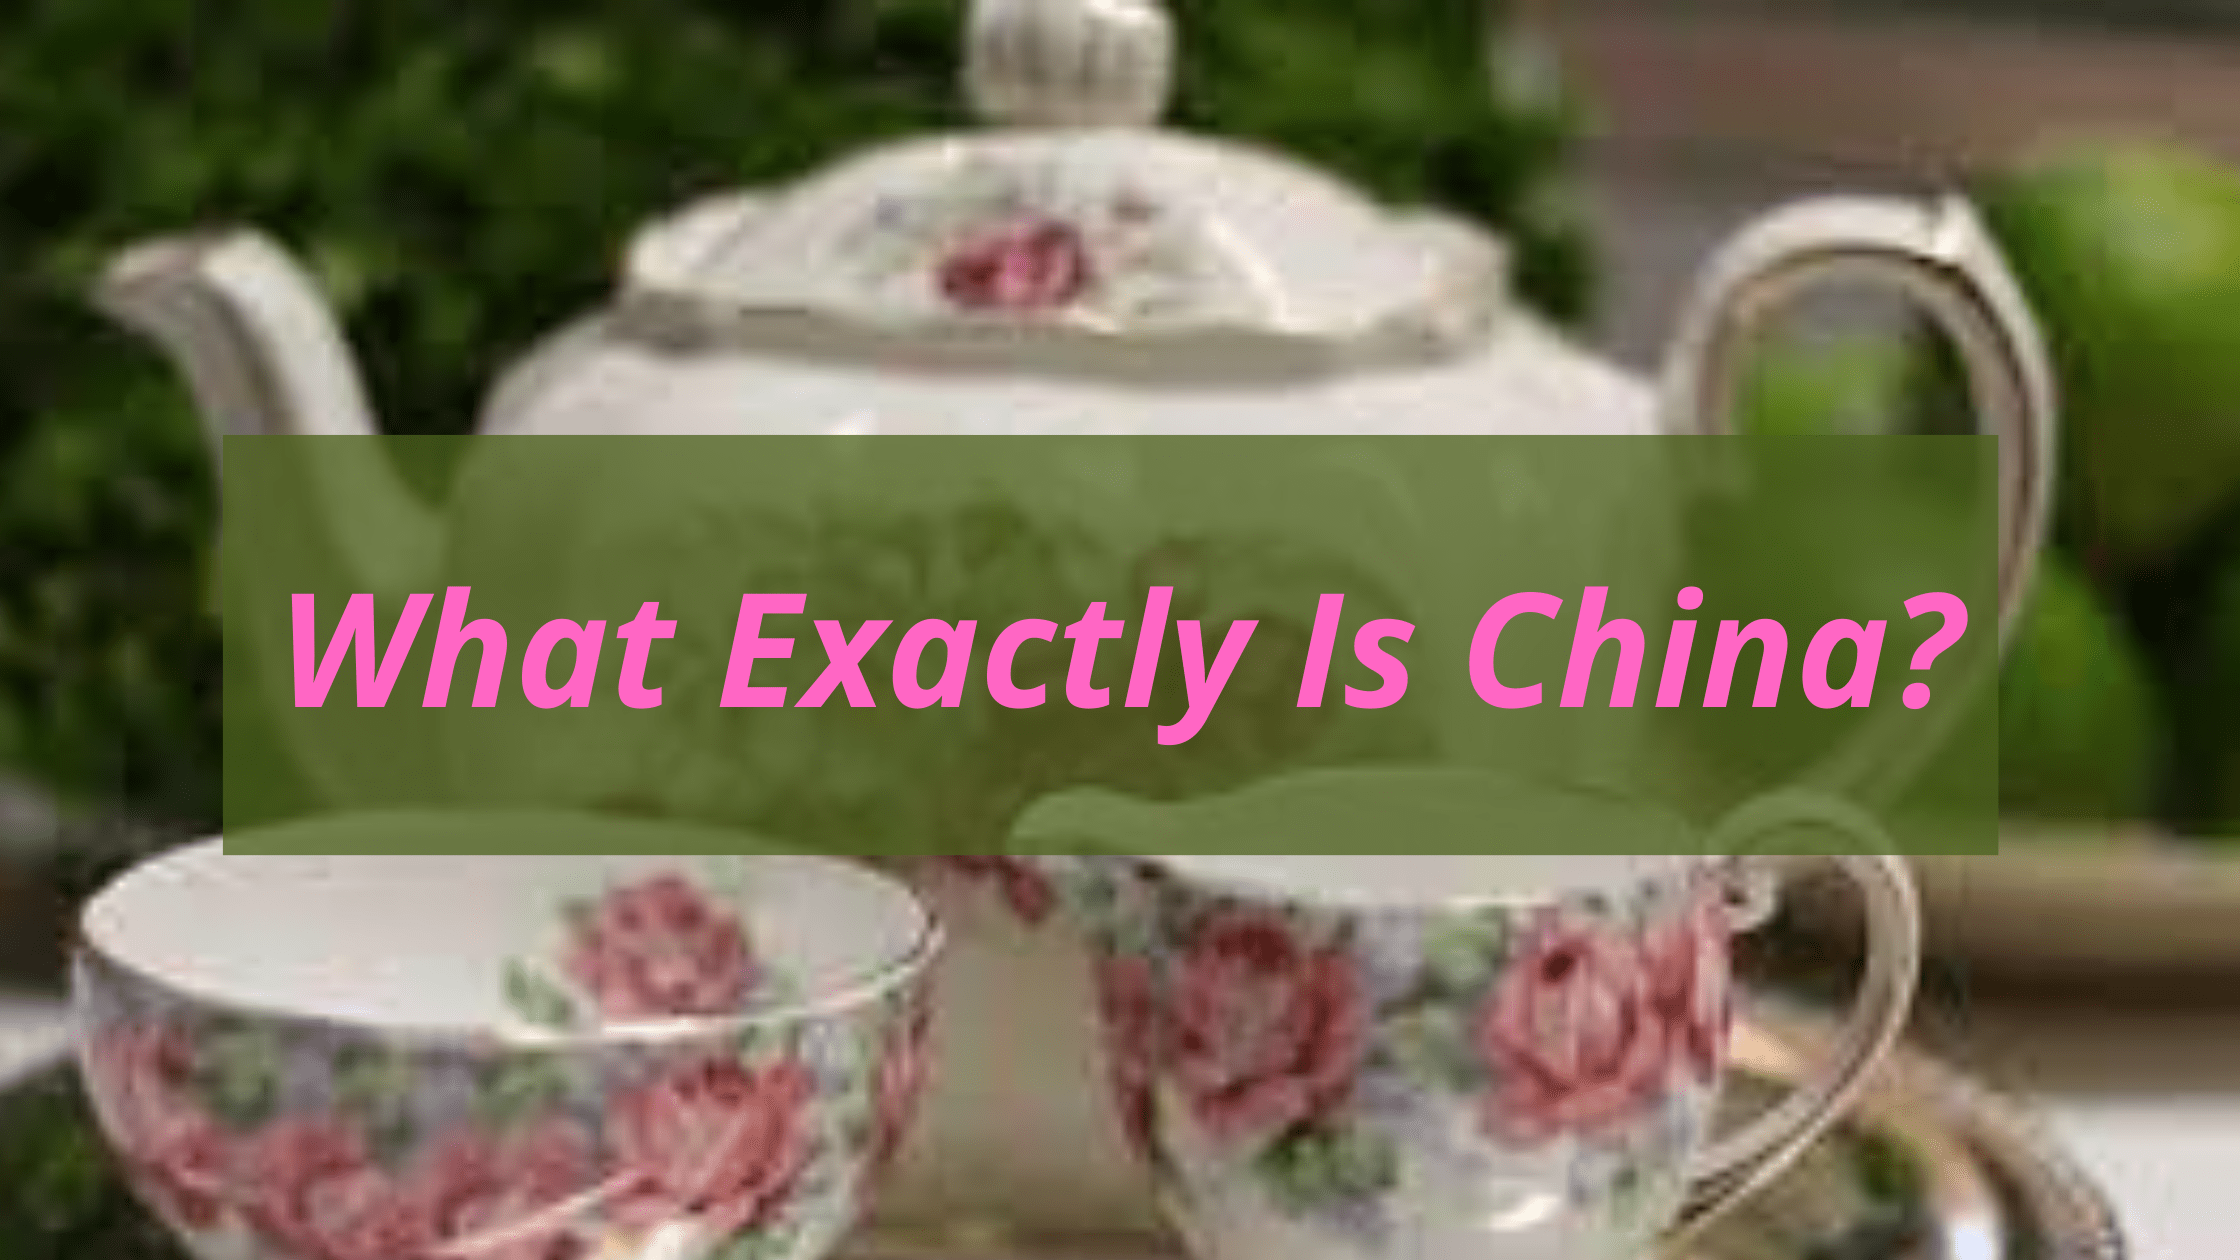 What Exactly Is China?